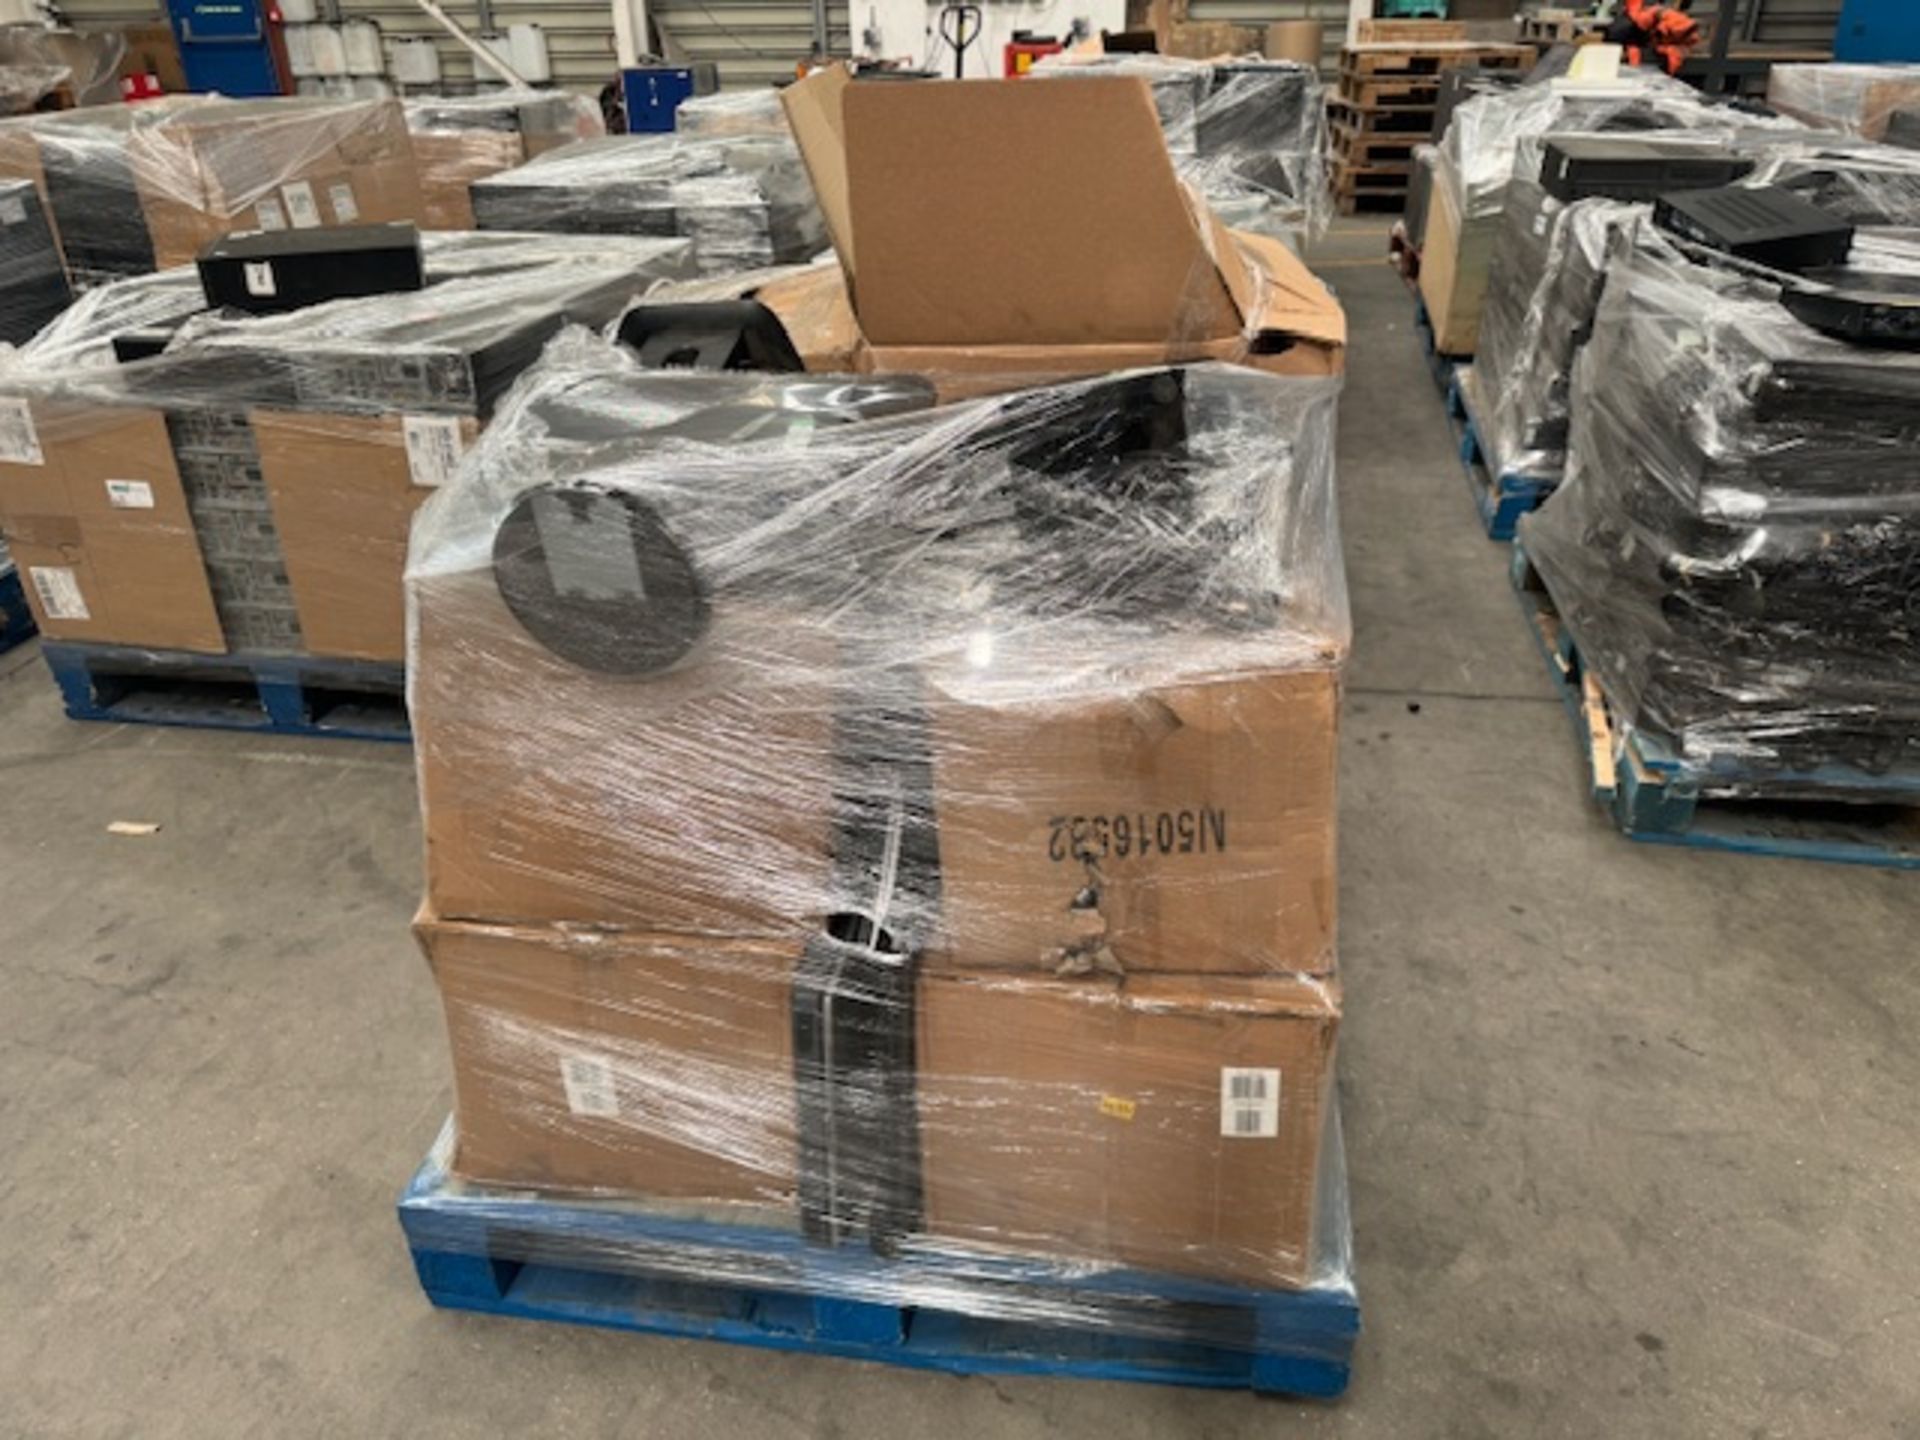 IT PALLET LOT INCLUDING DELL MONITORS, KEYBOARDS, LAPTOPS AND MUCH MORE PRICE NEW 6K - Bild 2 aus 4